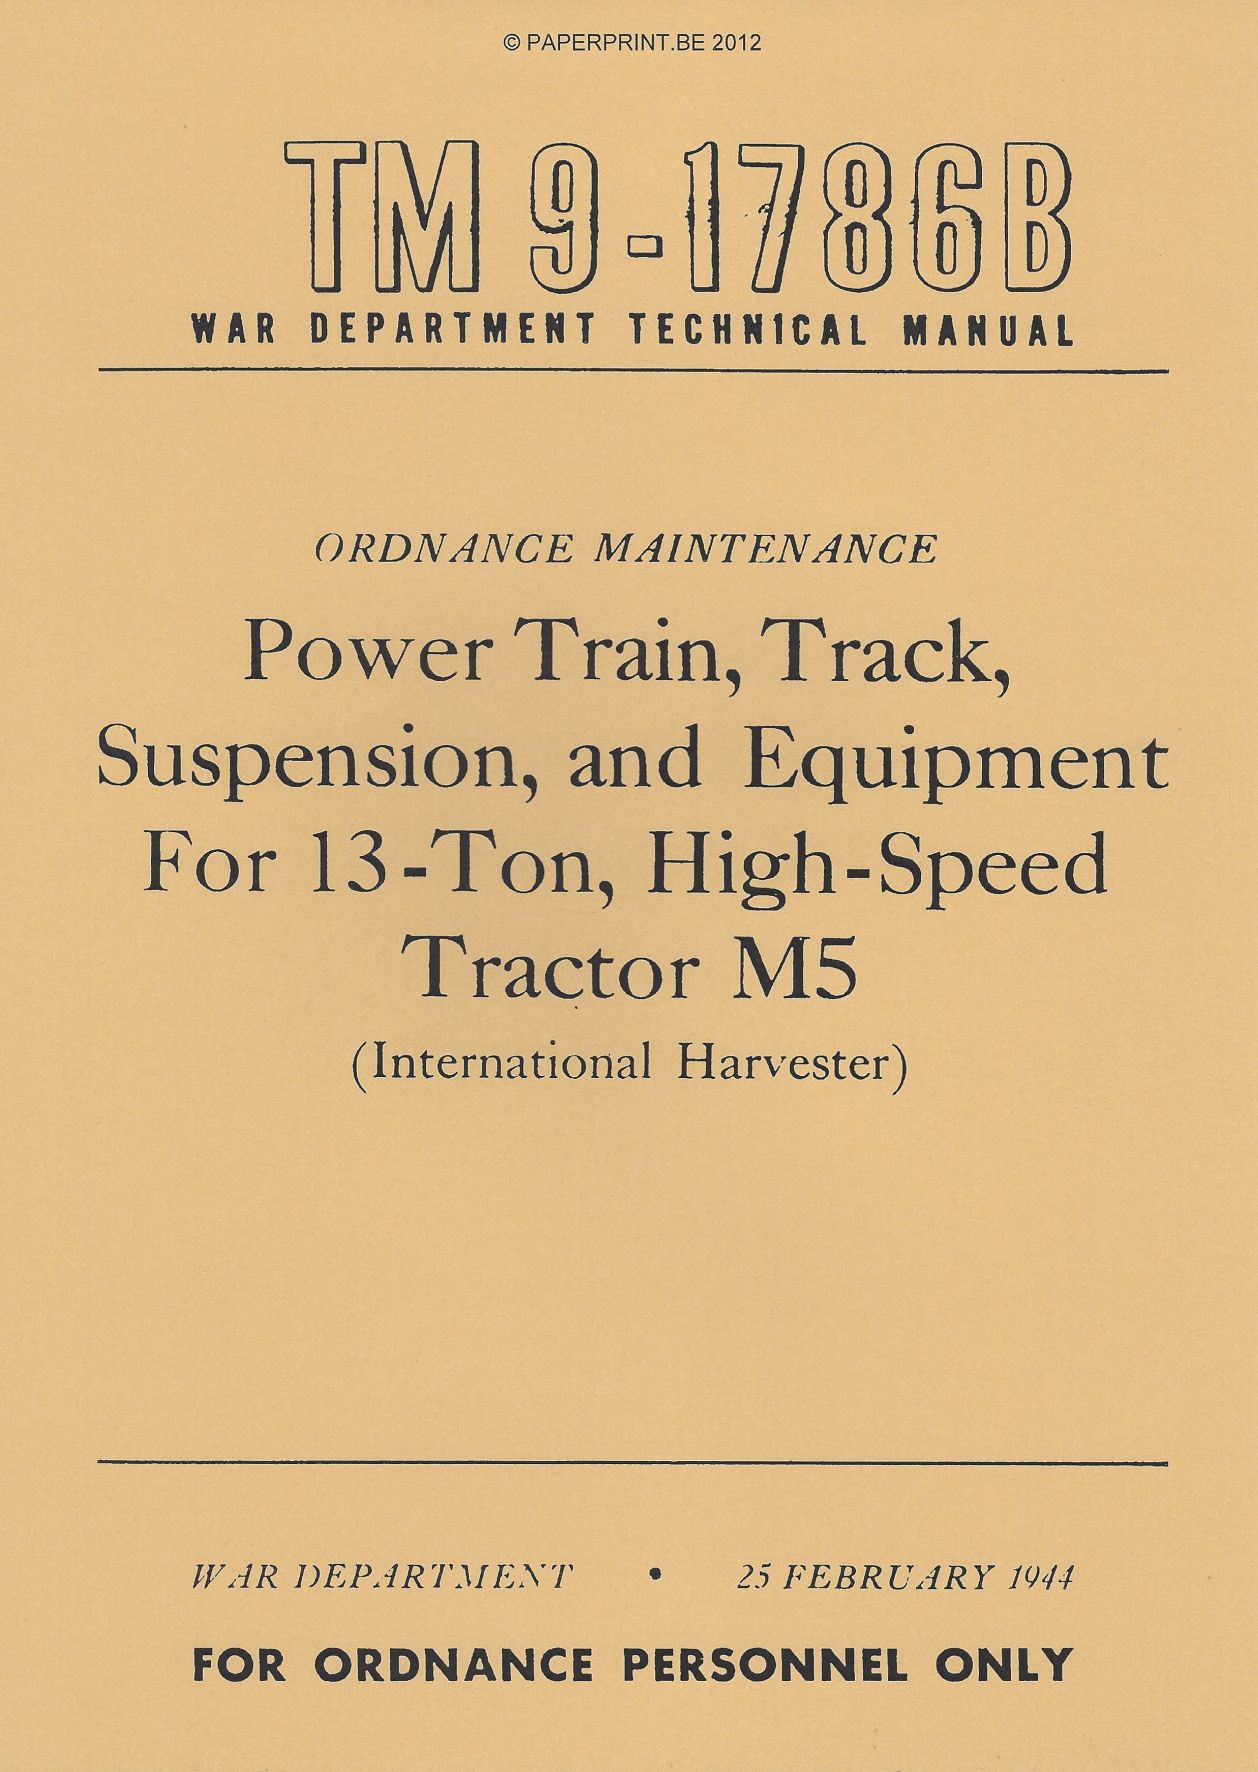 TM 9-1786B US POWER TRAIN, TRACK, SUSPENSION, AND EQUIPMENT FOR 13-TON, HIGH-SPEED TRACTOR M5